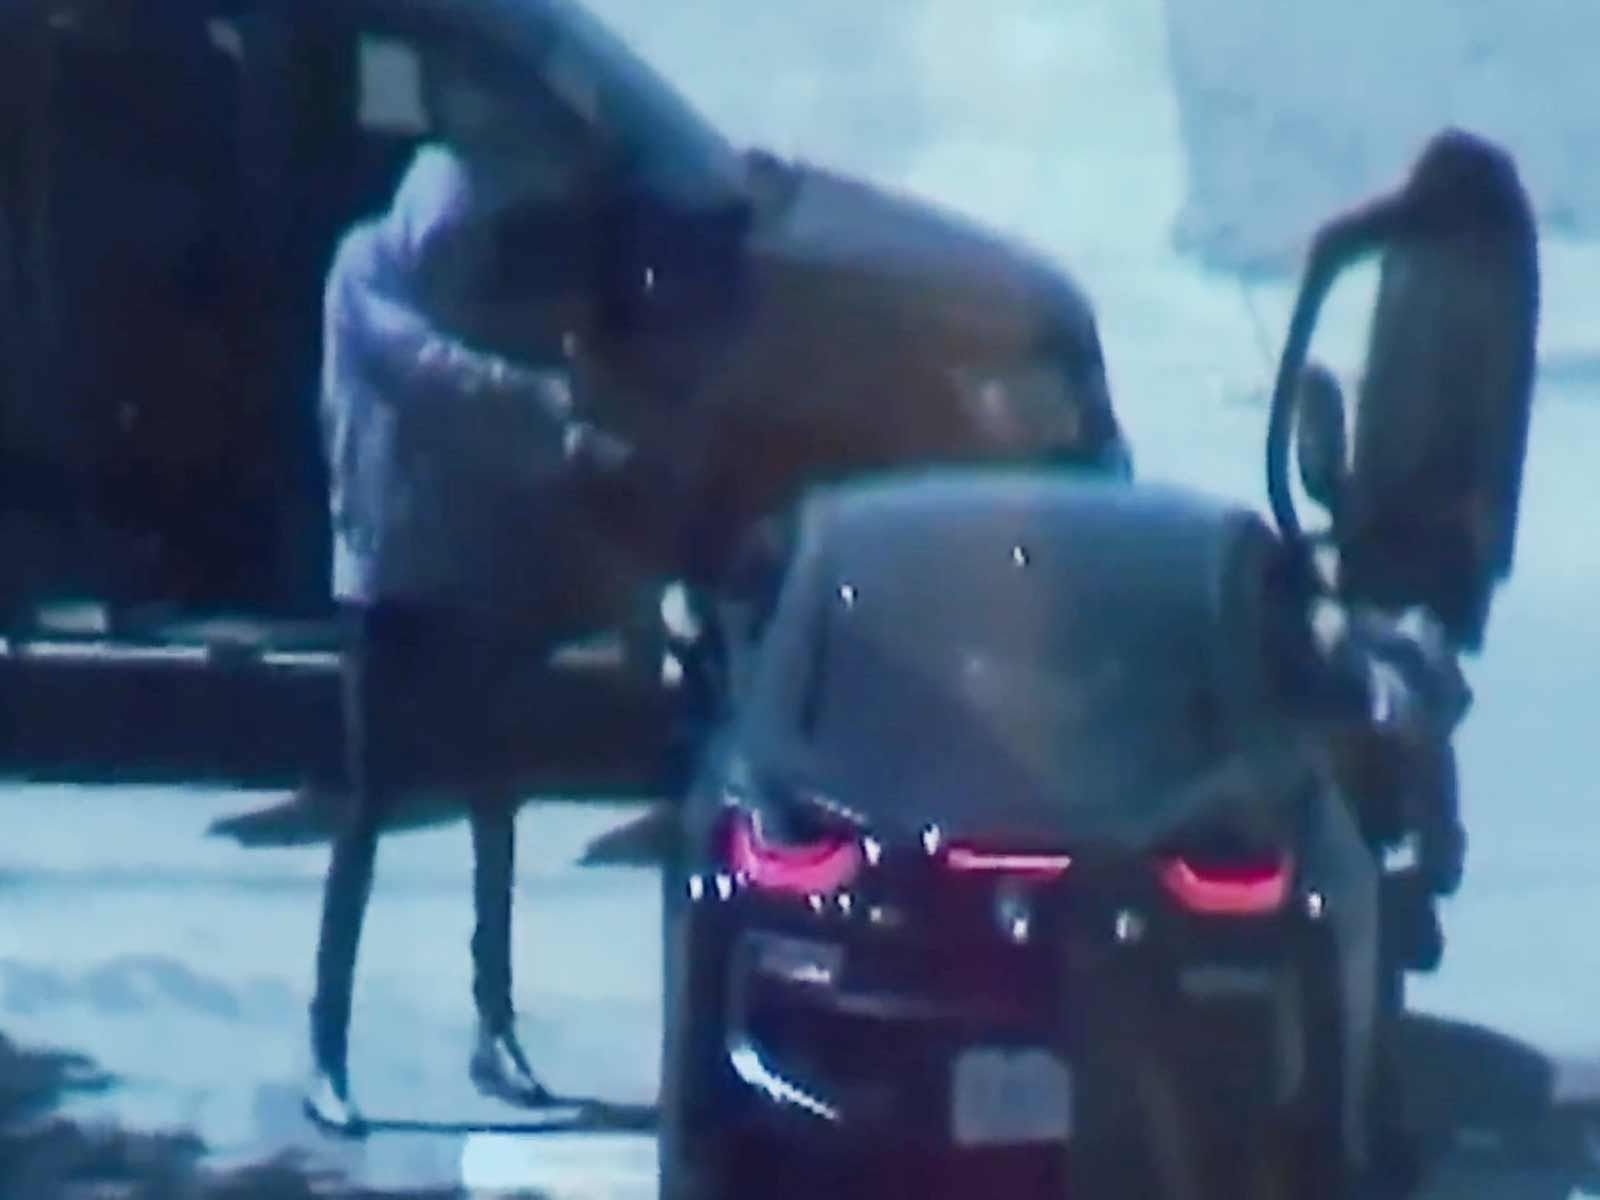 New Video Shows Xxxtentacion Murdered In Cold Blood